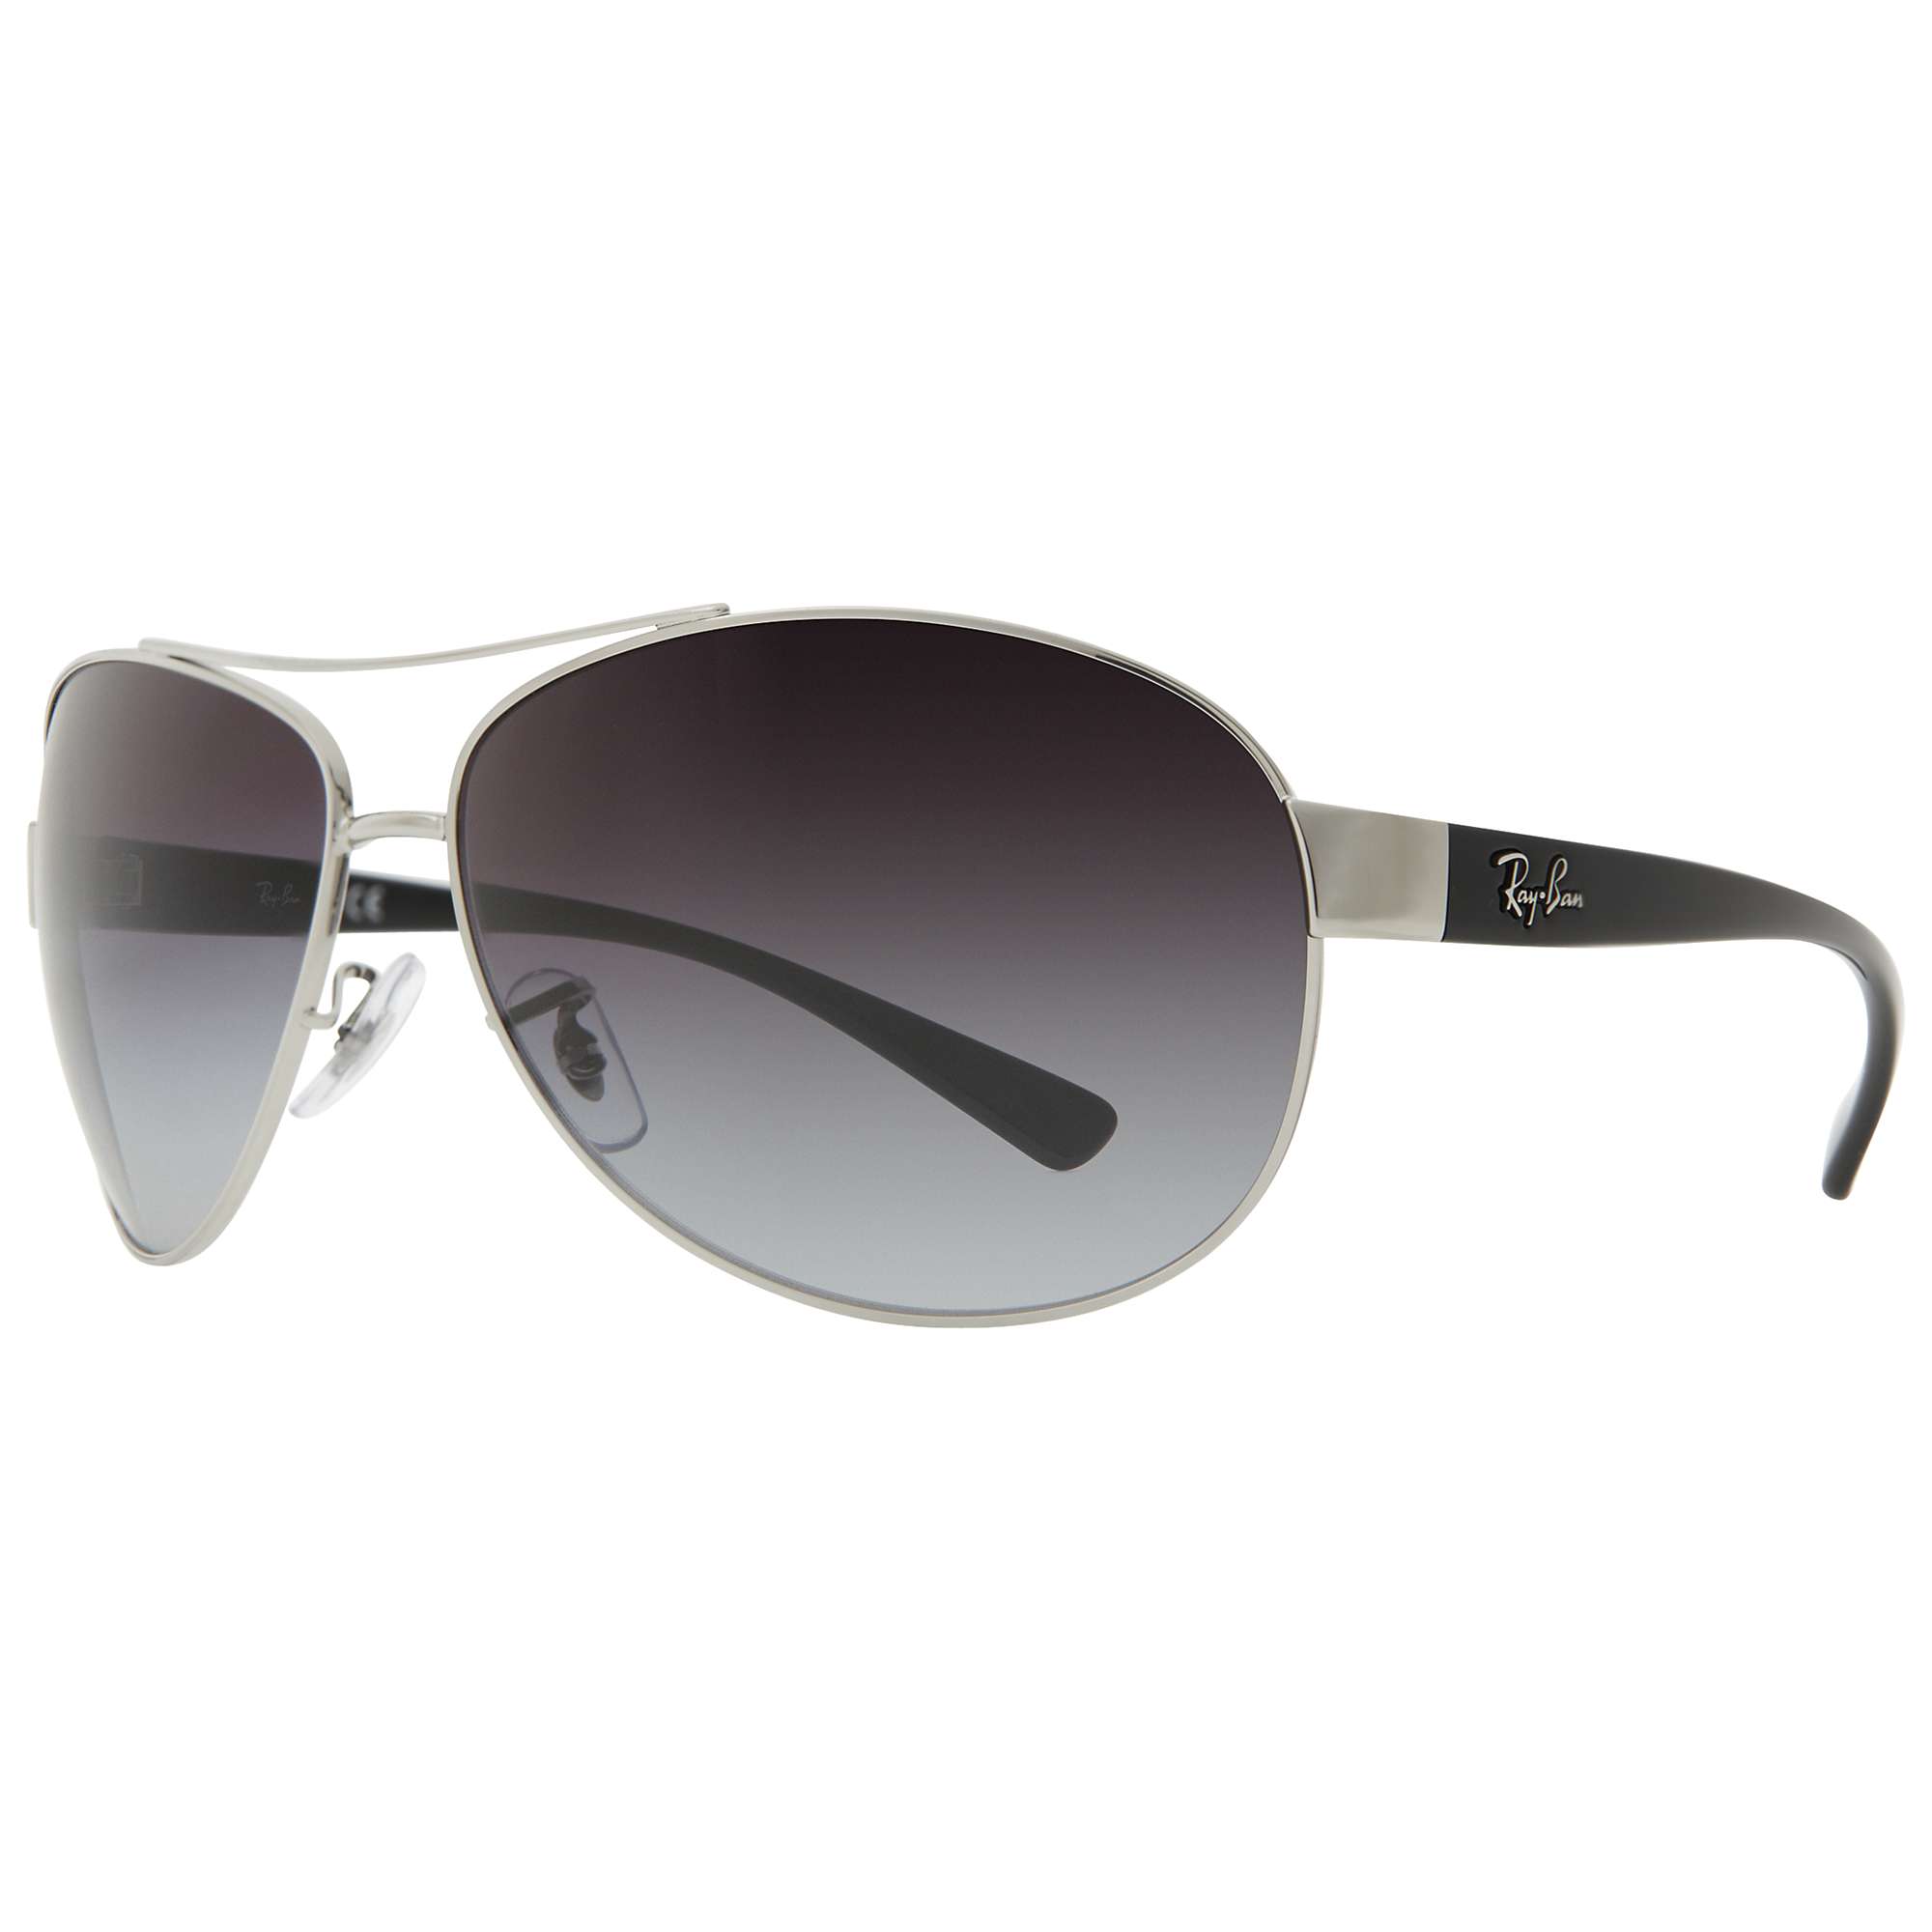 Buy Ray-Ban RB3386 Oval Aviator Sunglasses Online at johnlewis.com